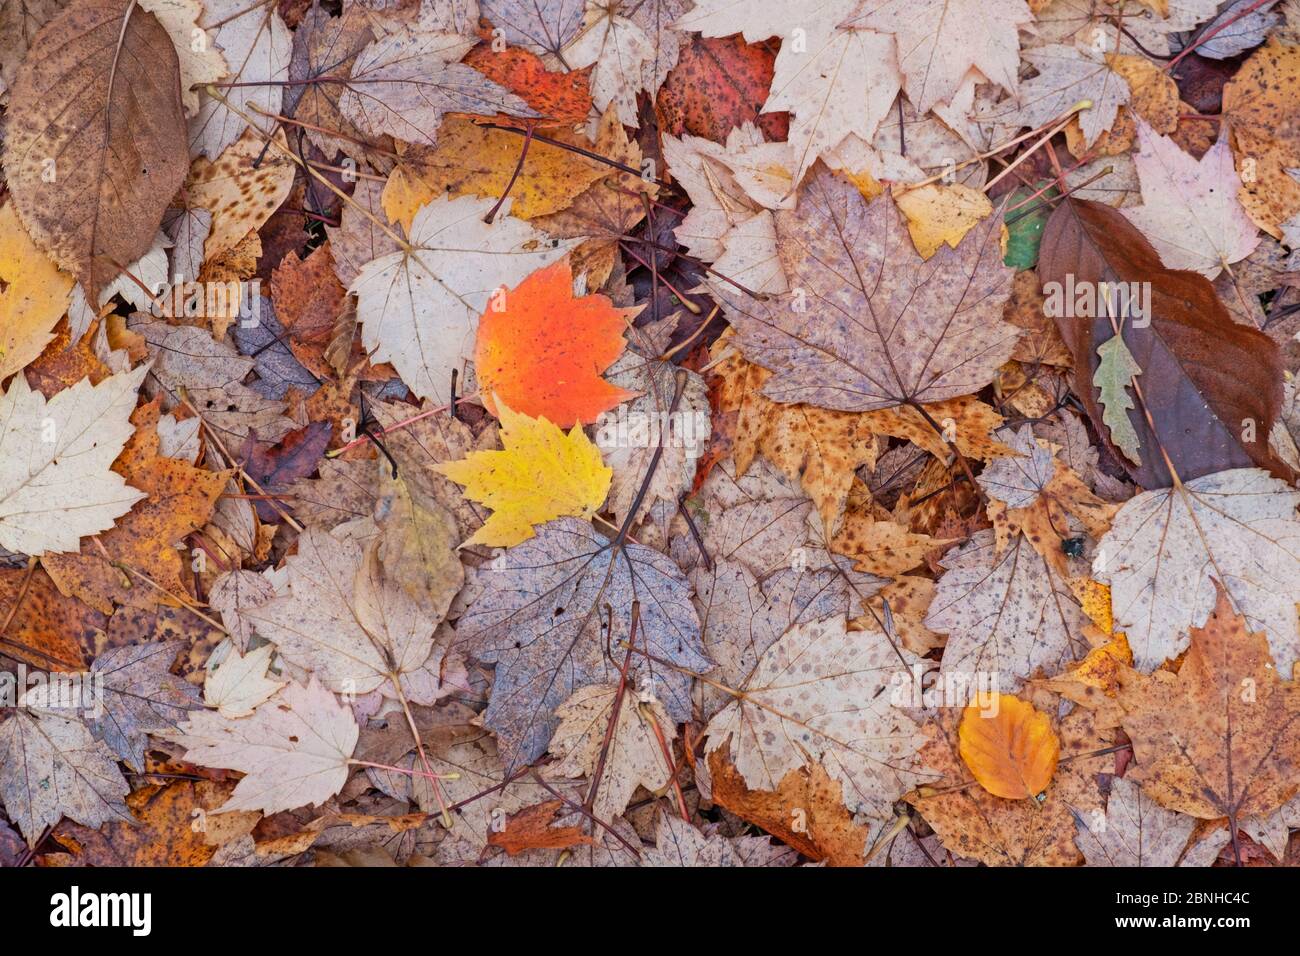 A colorful carpet of fallen leaves in a UK woodland in autumn Stock Photo